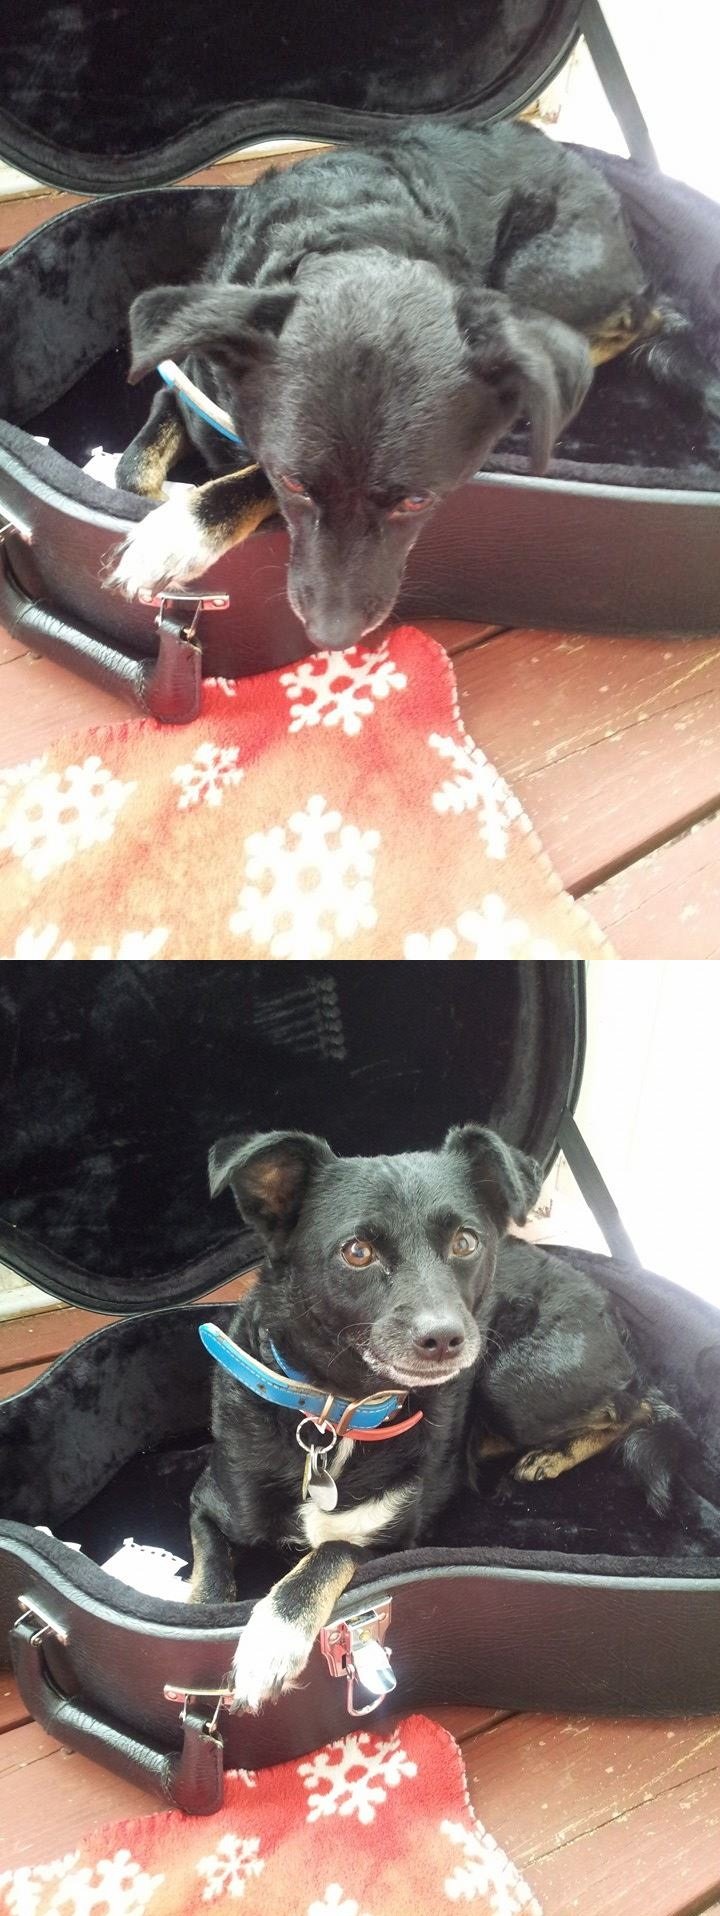 My Dog :). Today, while practicing, I looked over only to find my dog laying in my guitar case..